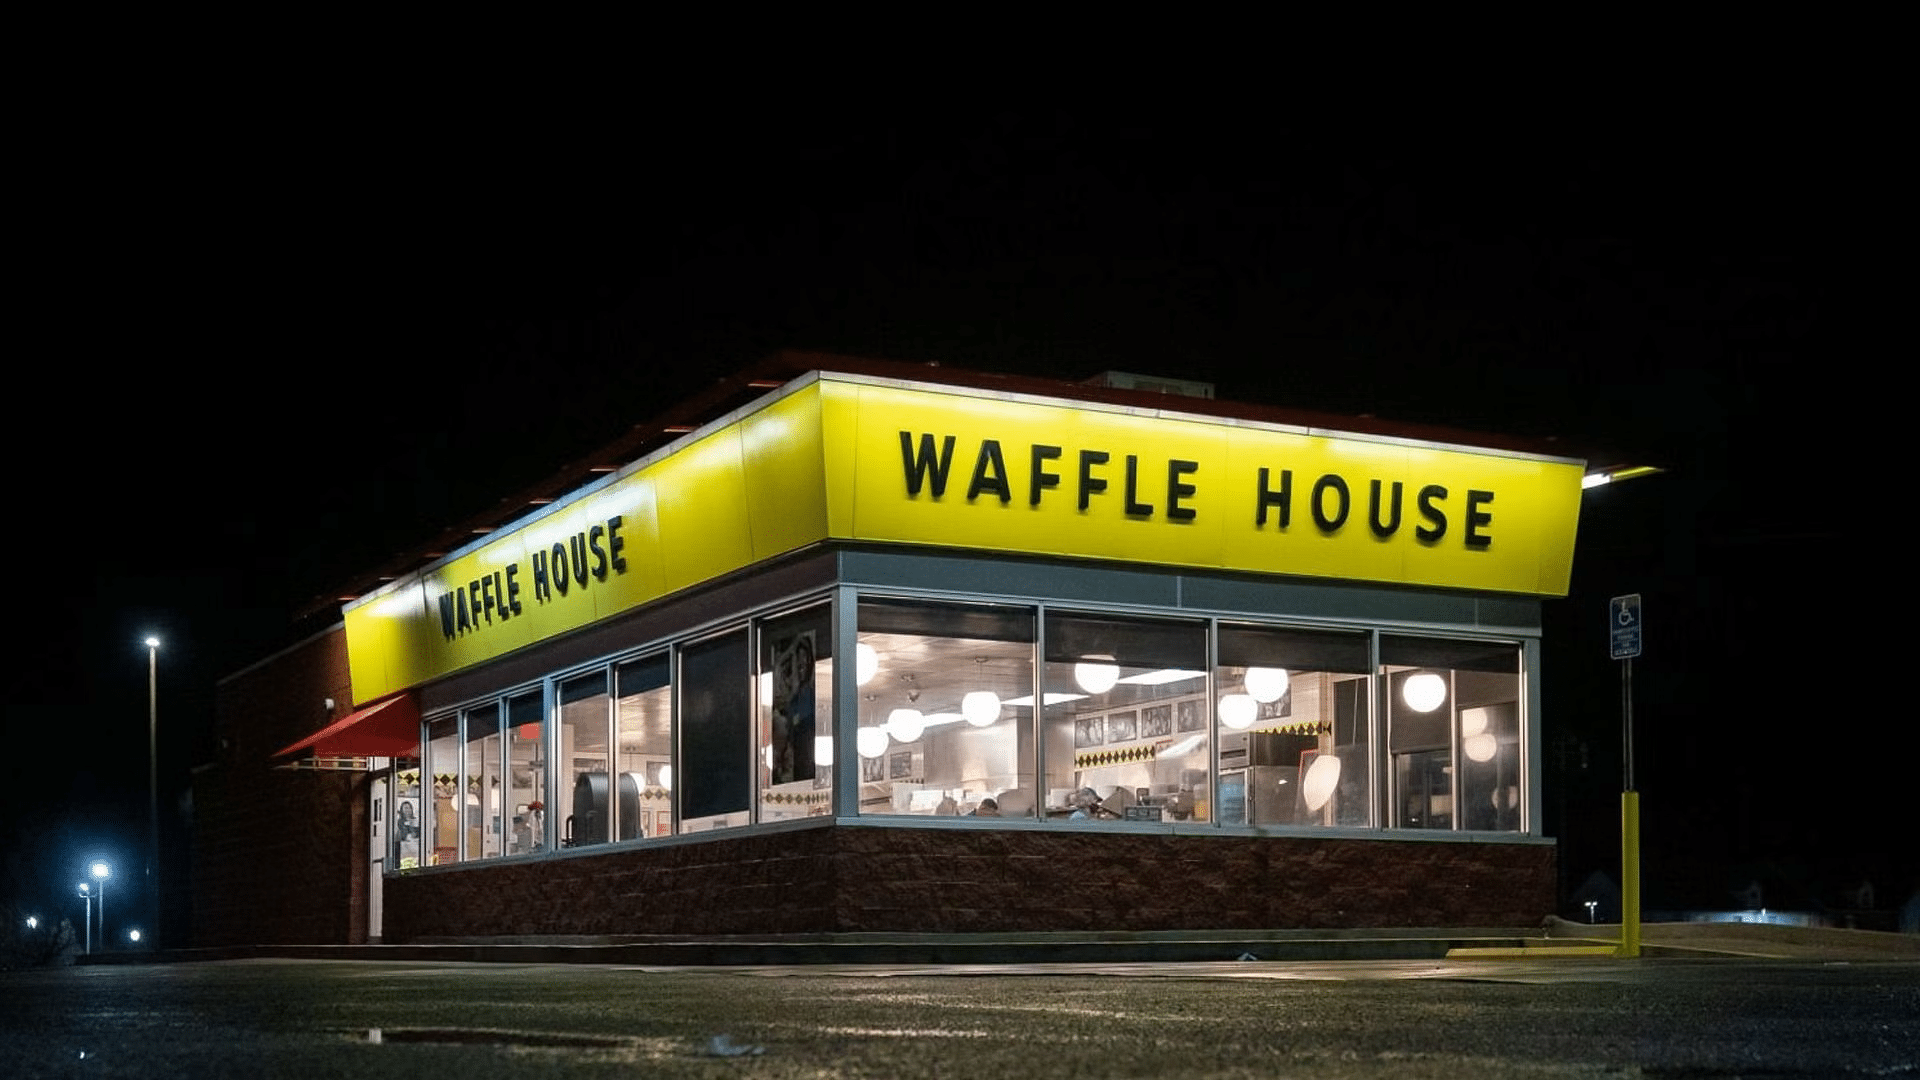 The waffle house has found its host